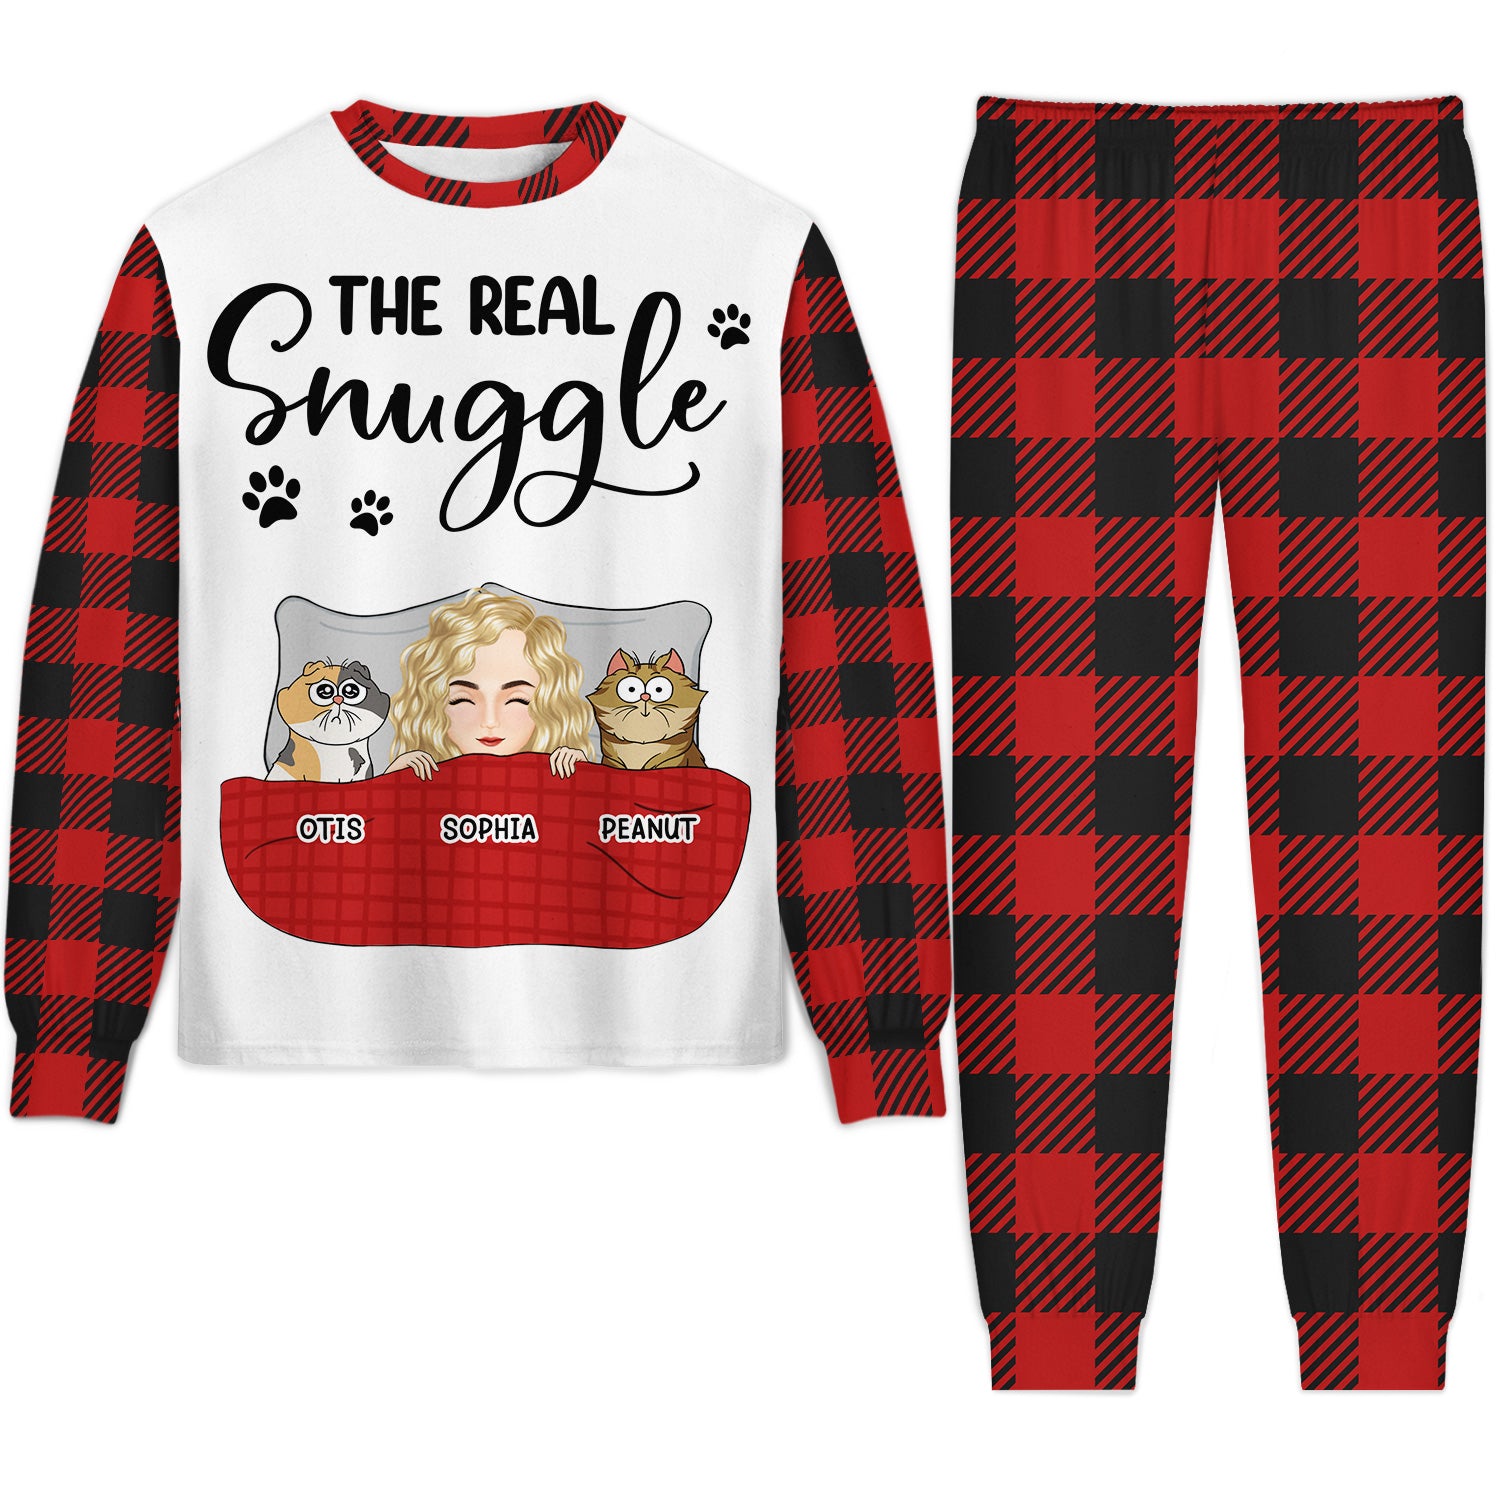 The Real Snuggle Cartoon Style - Gift For Cat Lovers, Cat Mom, Cat Dad - Personalized Unisex Pajamas Set